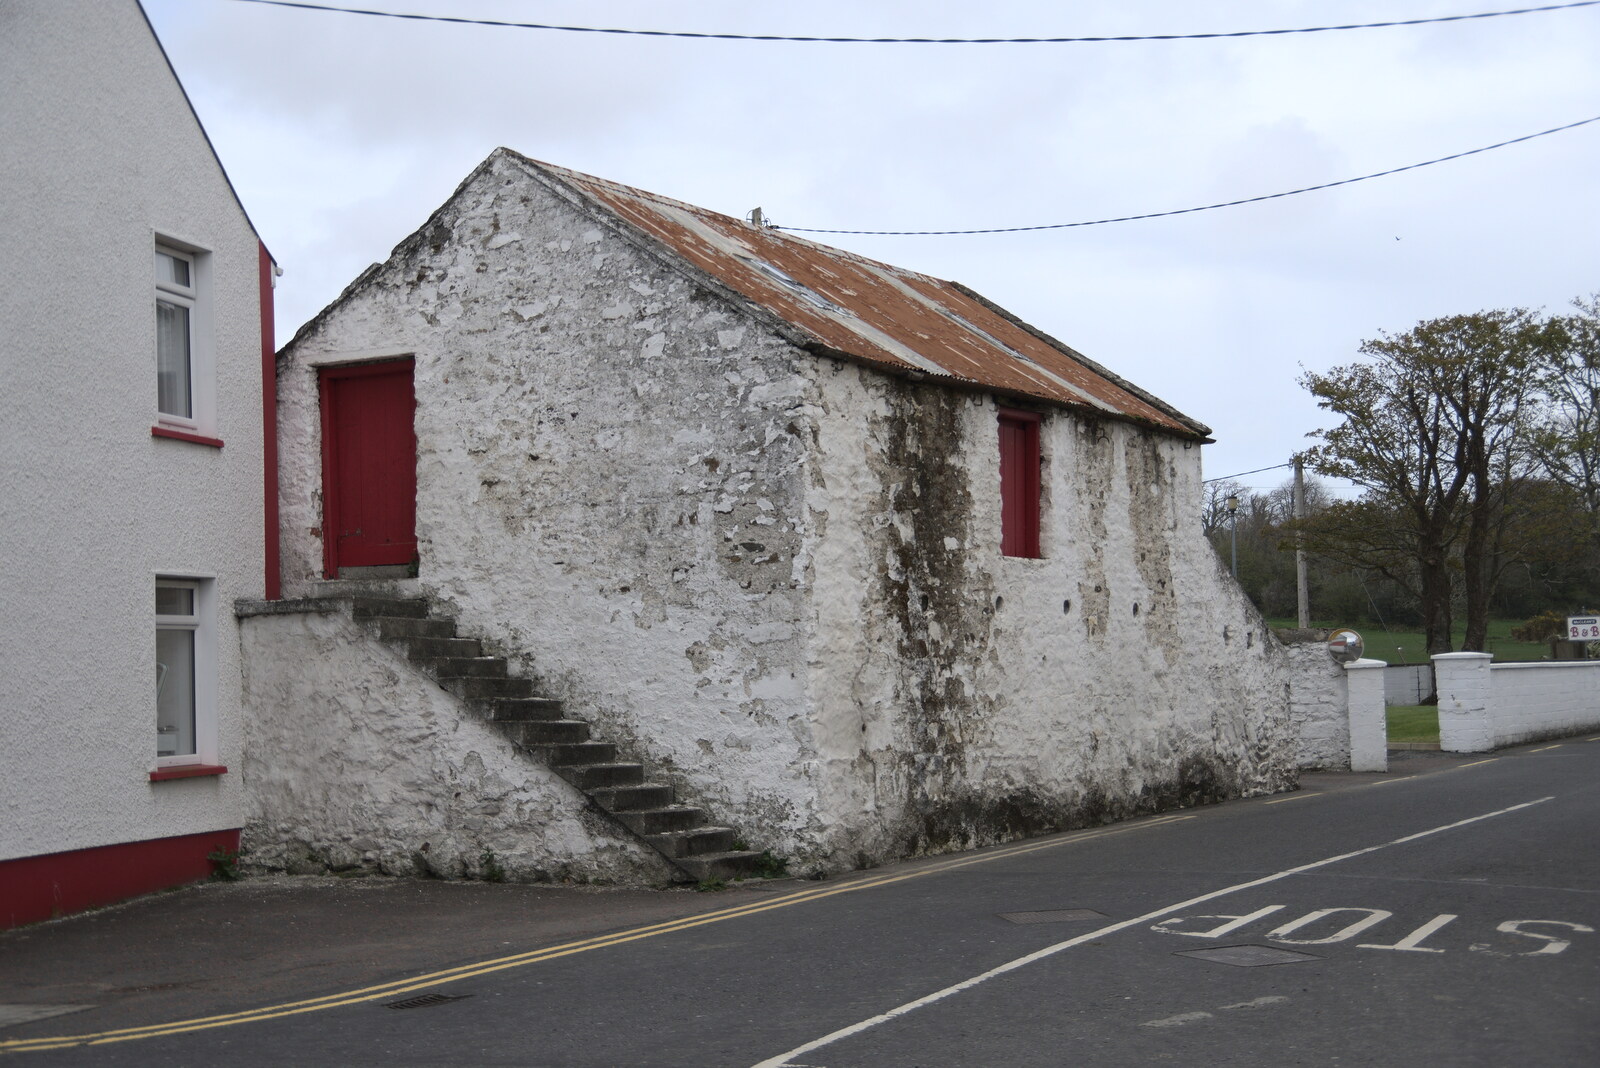 Greencastle, Doagh and Malin Head, County Donegal, Ireland - 19th April 2022: An old shed in Malin